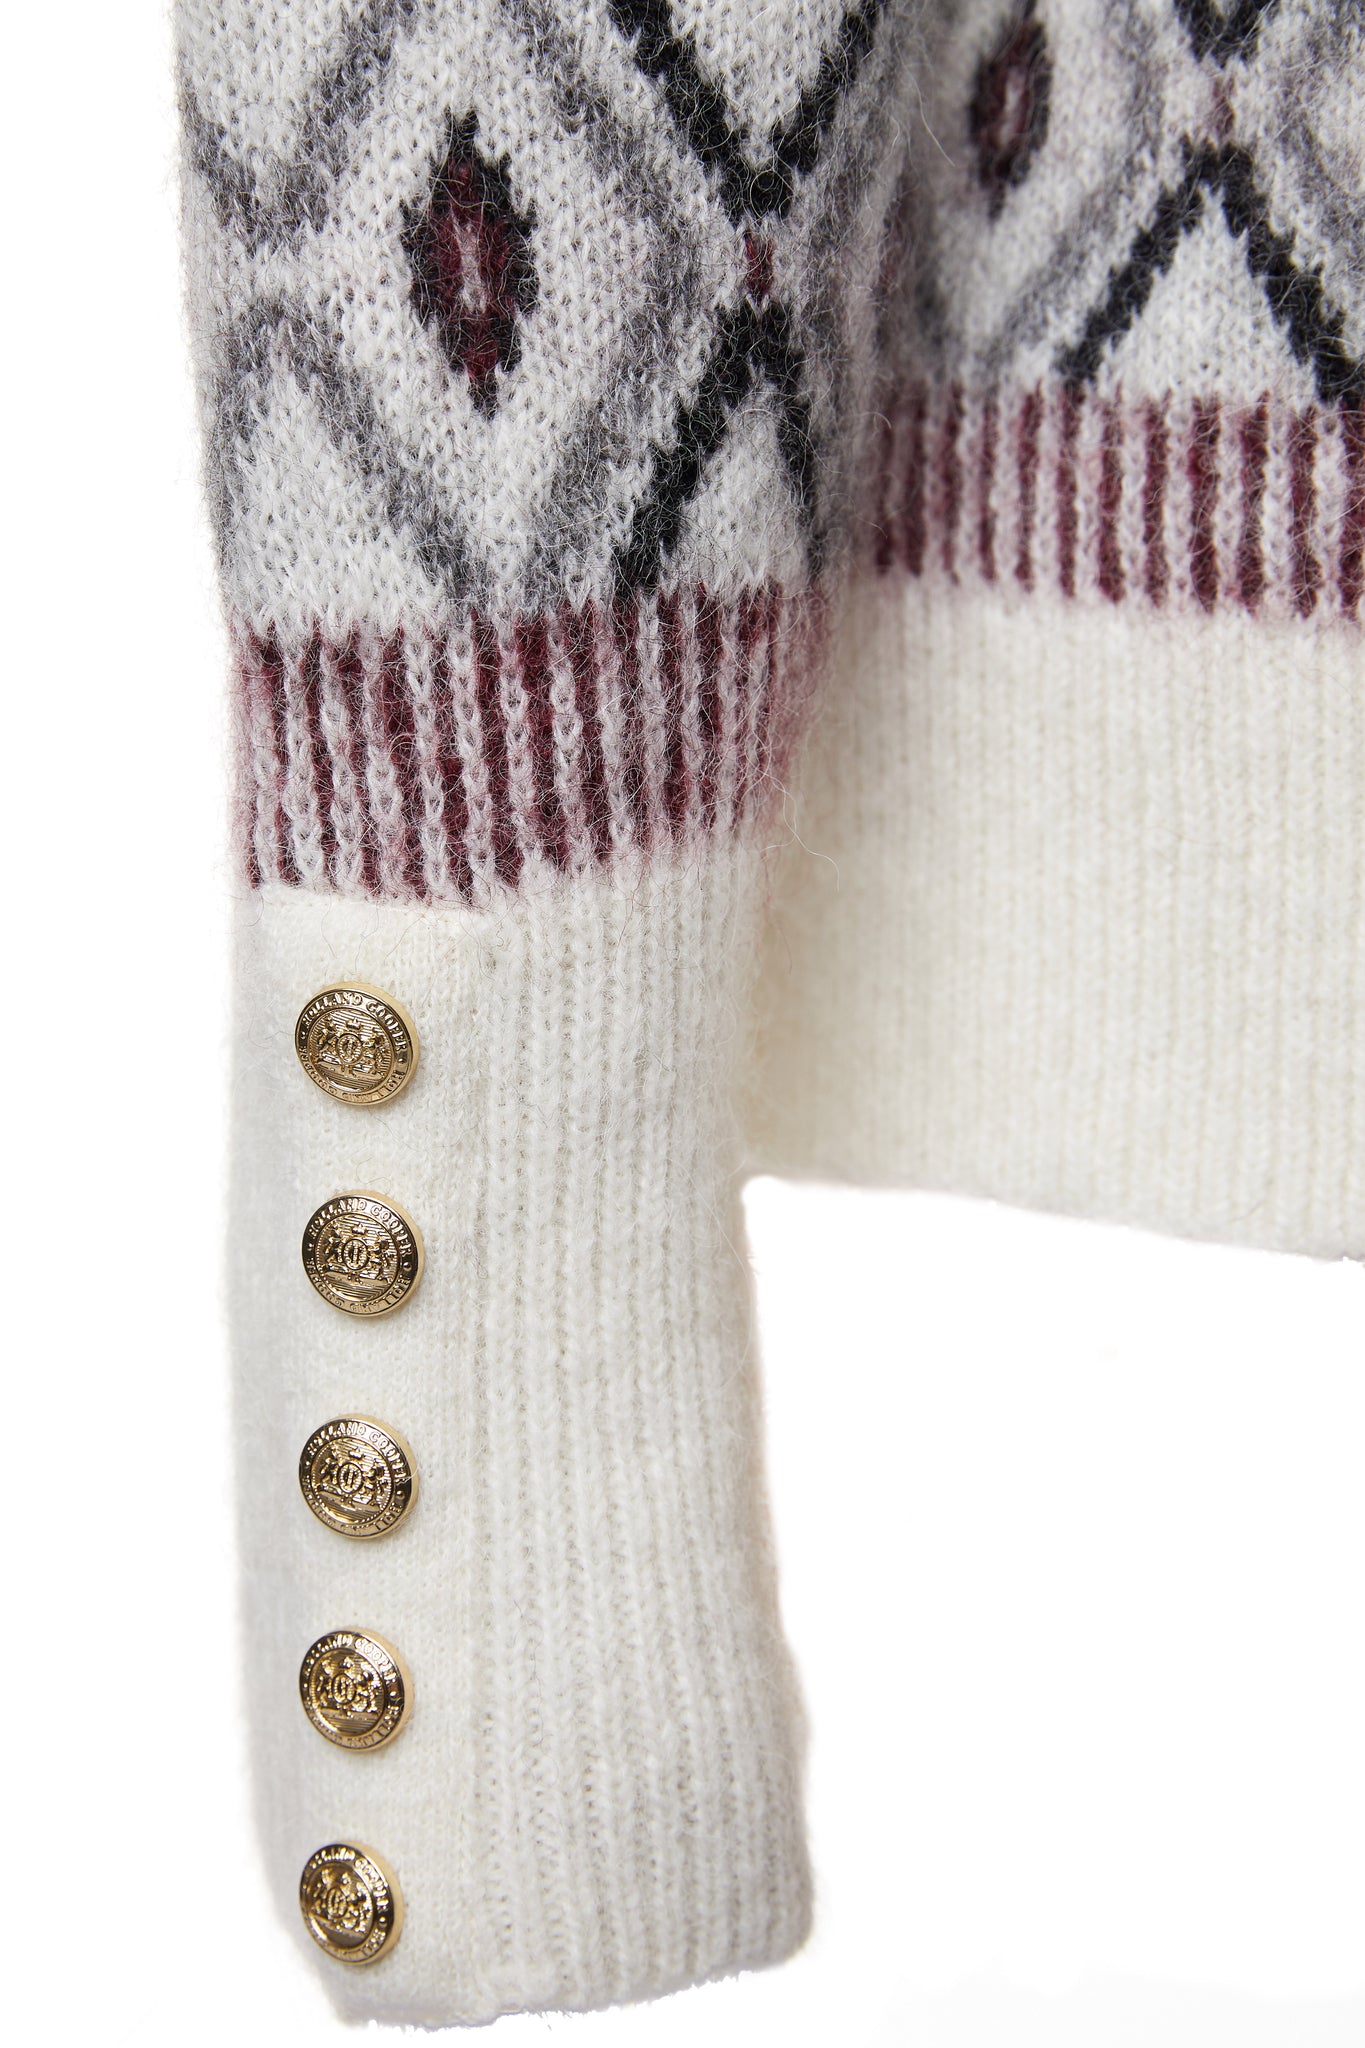 gold button detail on cuffs of a classic cream roll neck jumper with fairisle knit in red and grey around the shoulders waistline and cuffs and a split ribbed hem 